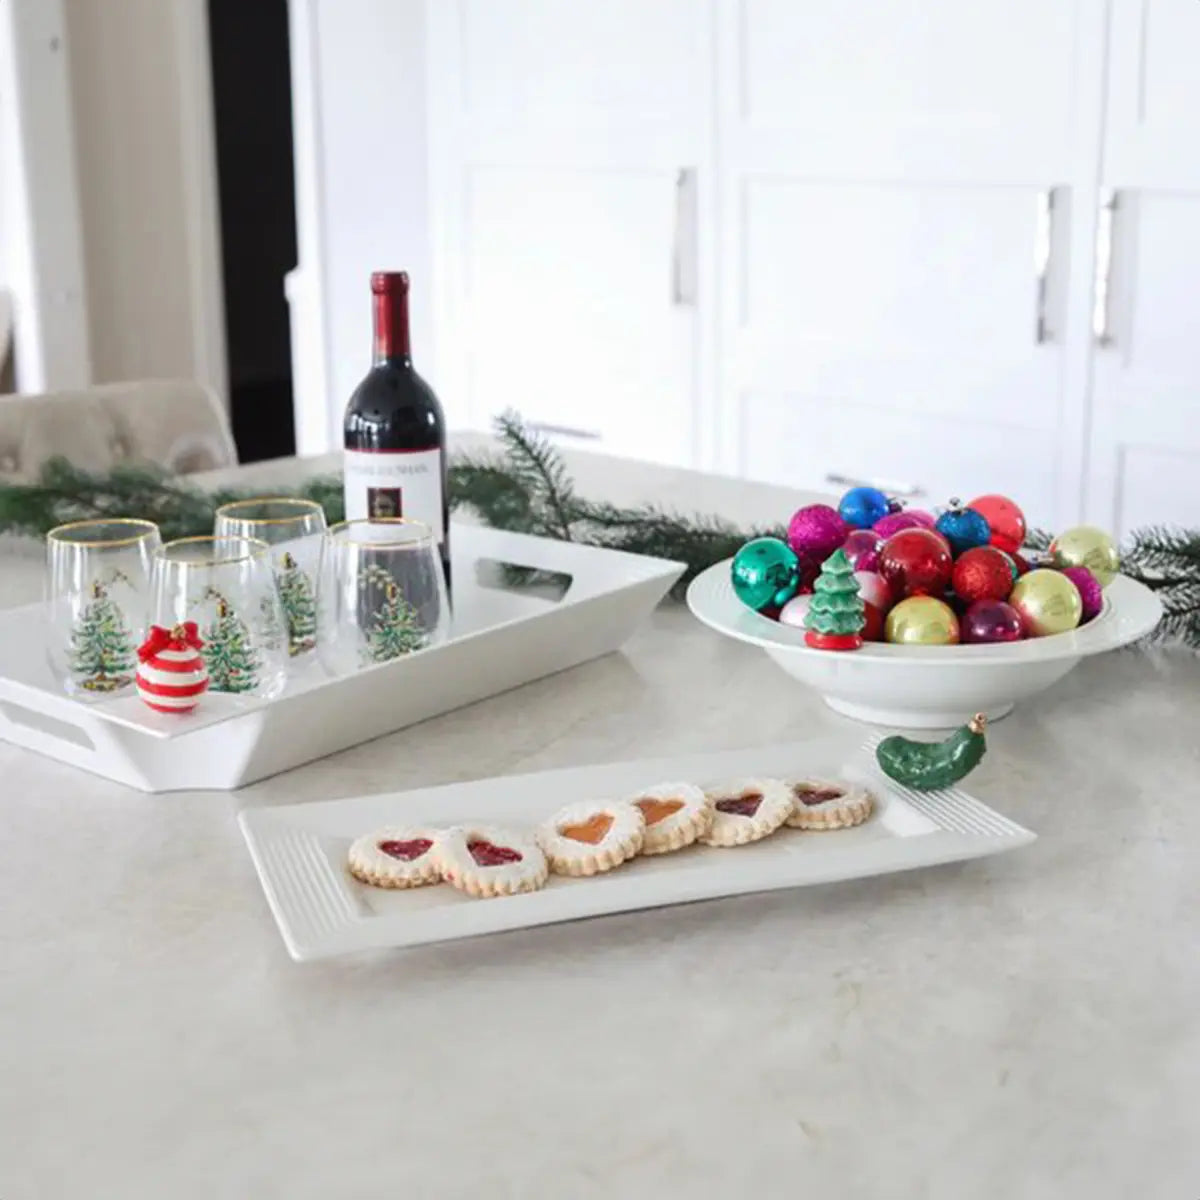 Nora Fleming Bread Tray with cookies on top with a pickle mini attached, set next to stemless wine glasses with christmas tree motifs and a wine bottle and small round ornaments in a bowl